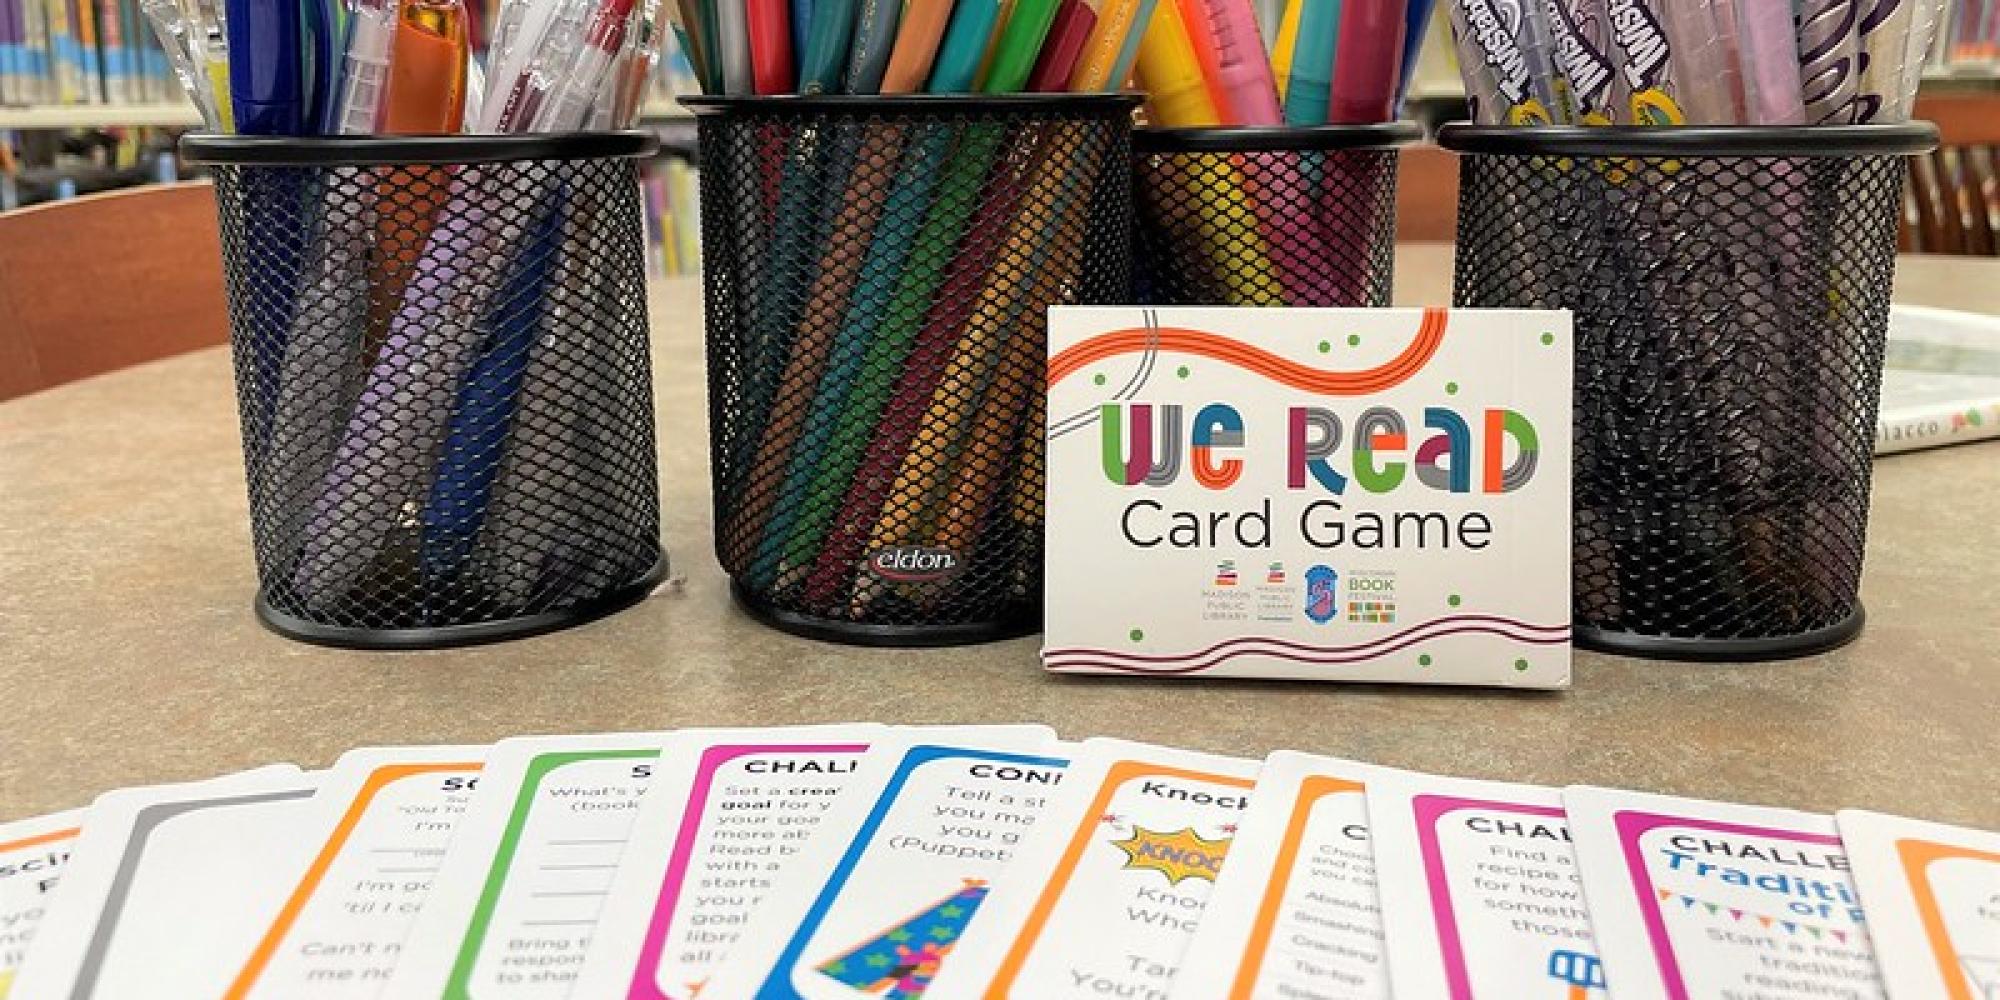 Pick up your copy of the We Read Card Game in English or Spanish at any Madison Public Library location